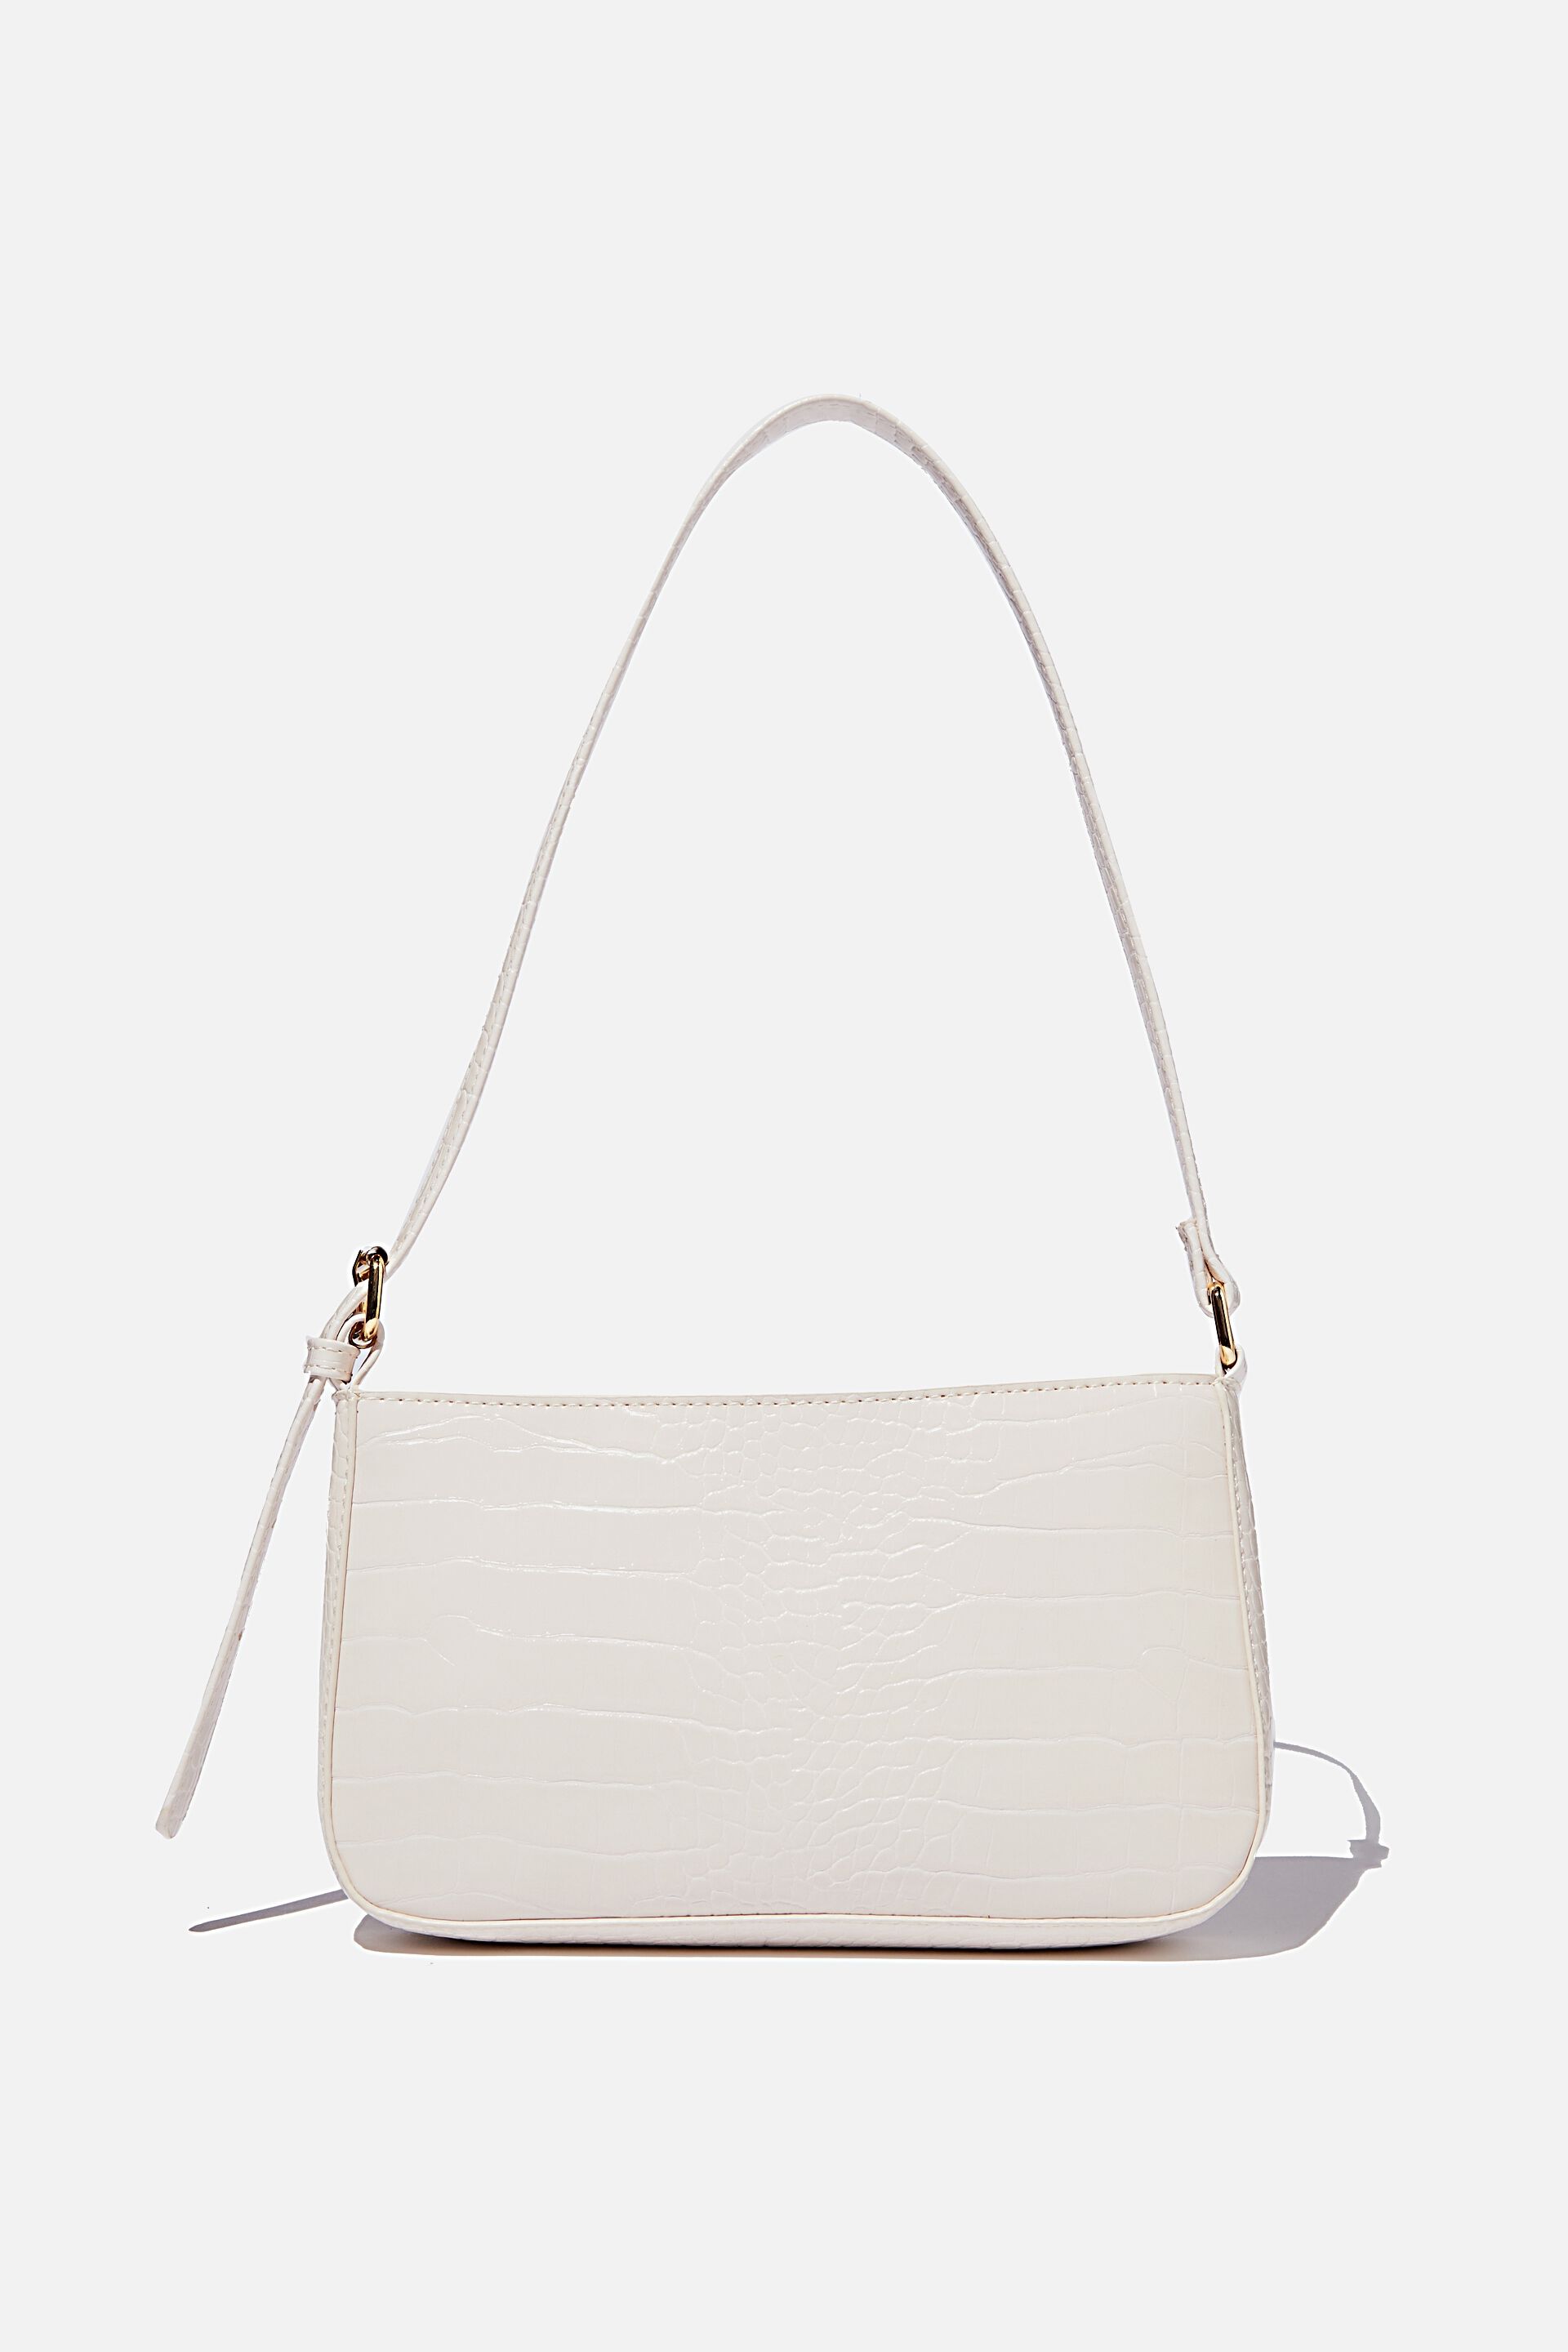 Gifts Gifts For Her | Lexi Underarm Bag - CU23834